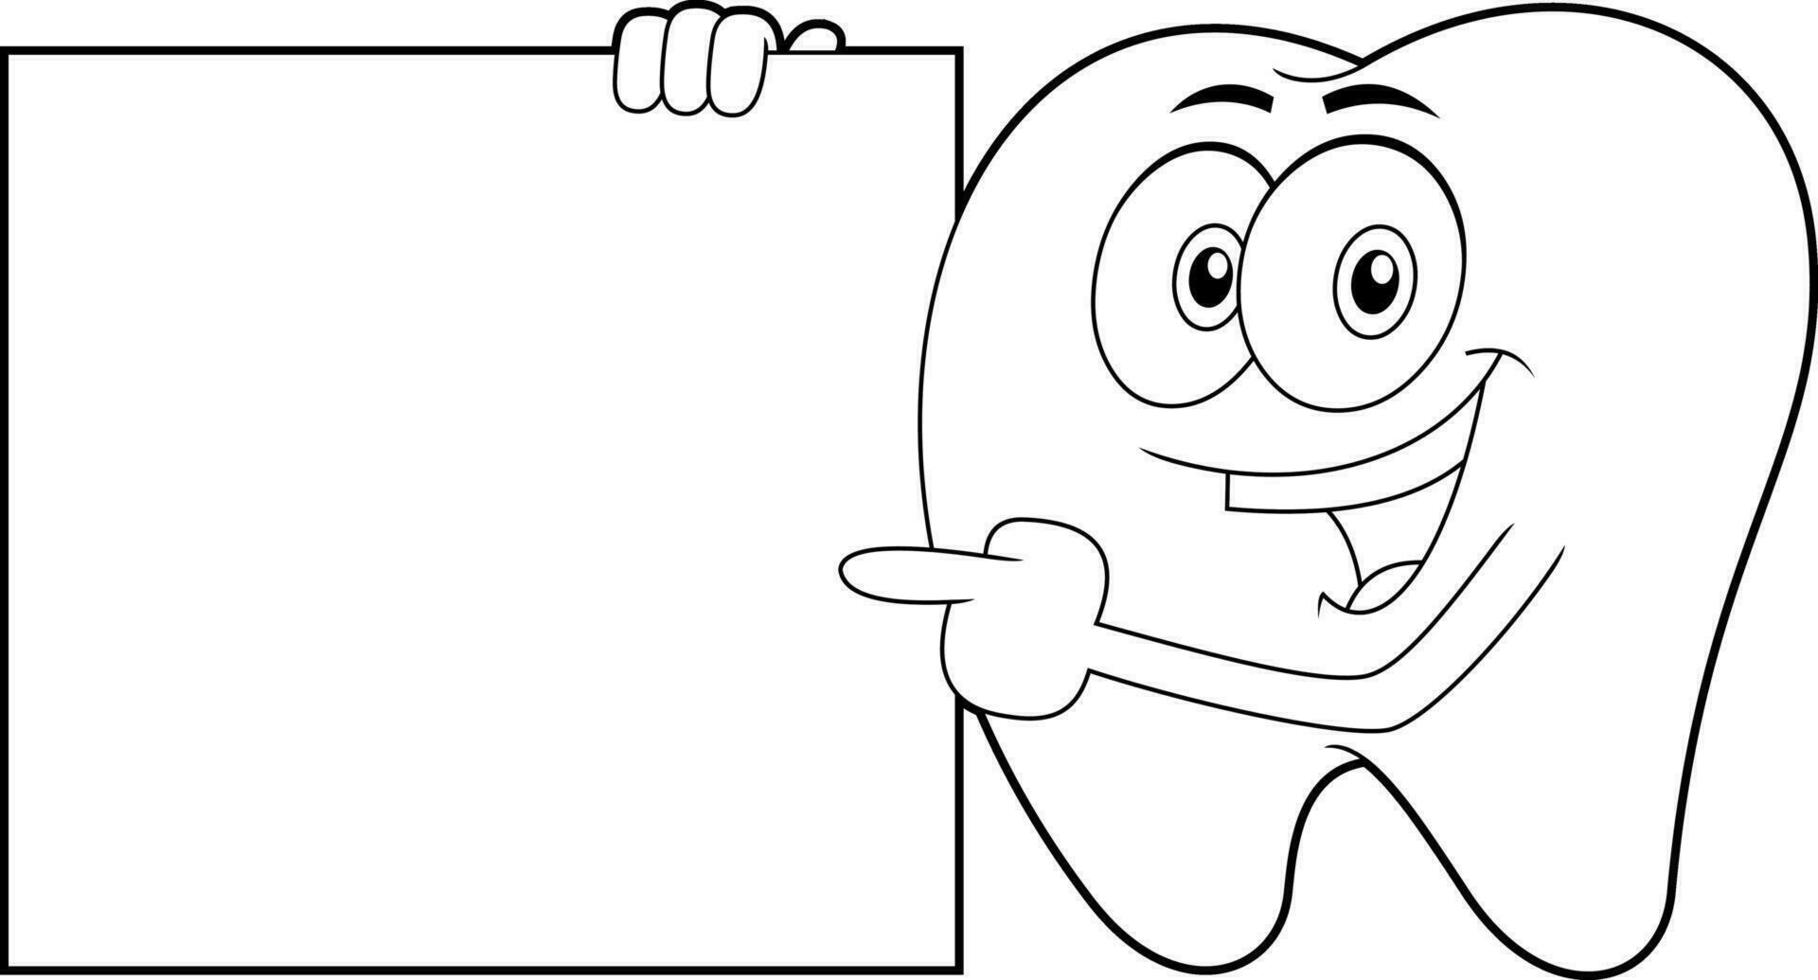 Outlined Happy Tooth Cartoon Character Pointing To Blank Sign. Vector Hand Drawn Illustration